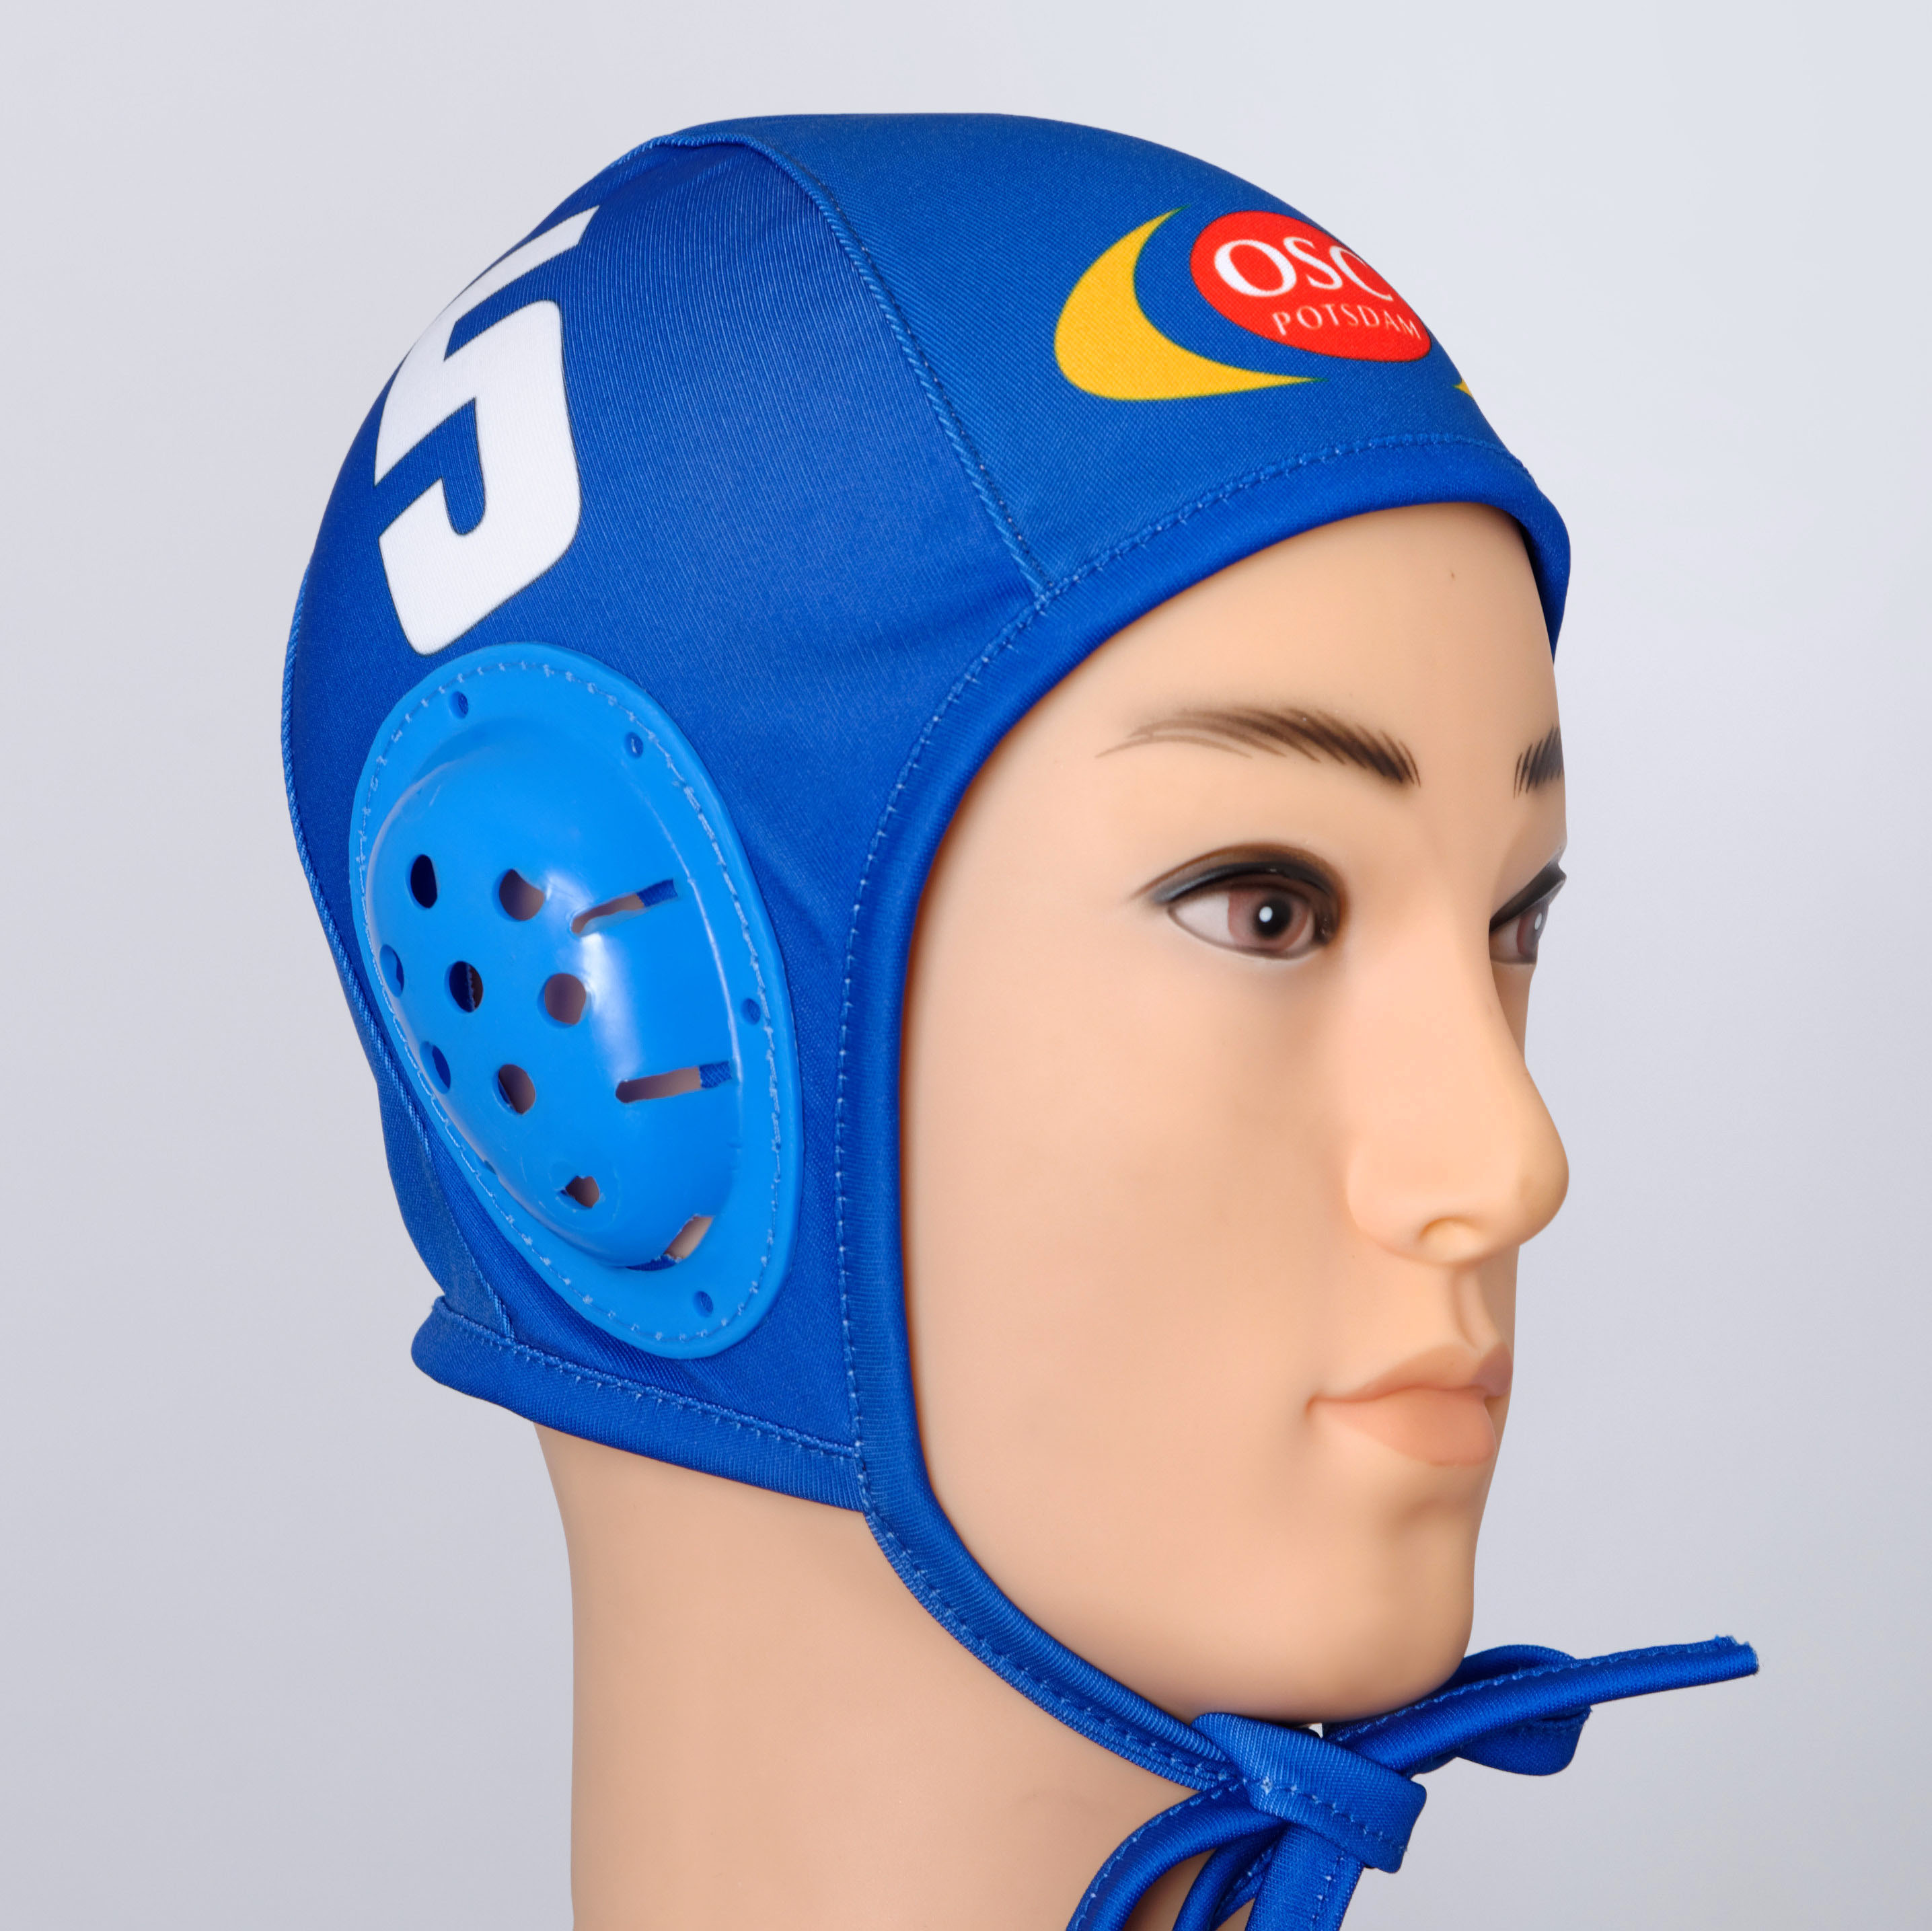 Head cap Water Polo Without Number Cuffia da Nuoto Unisex Adulto 